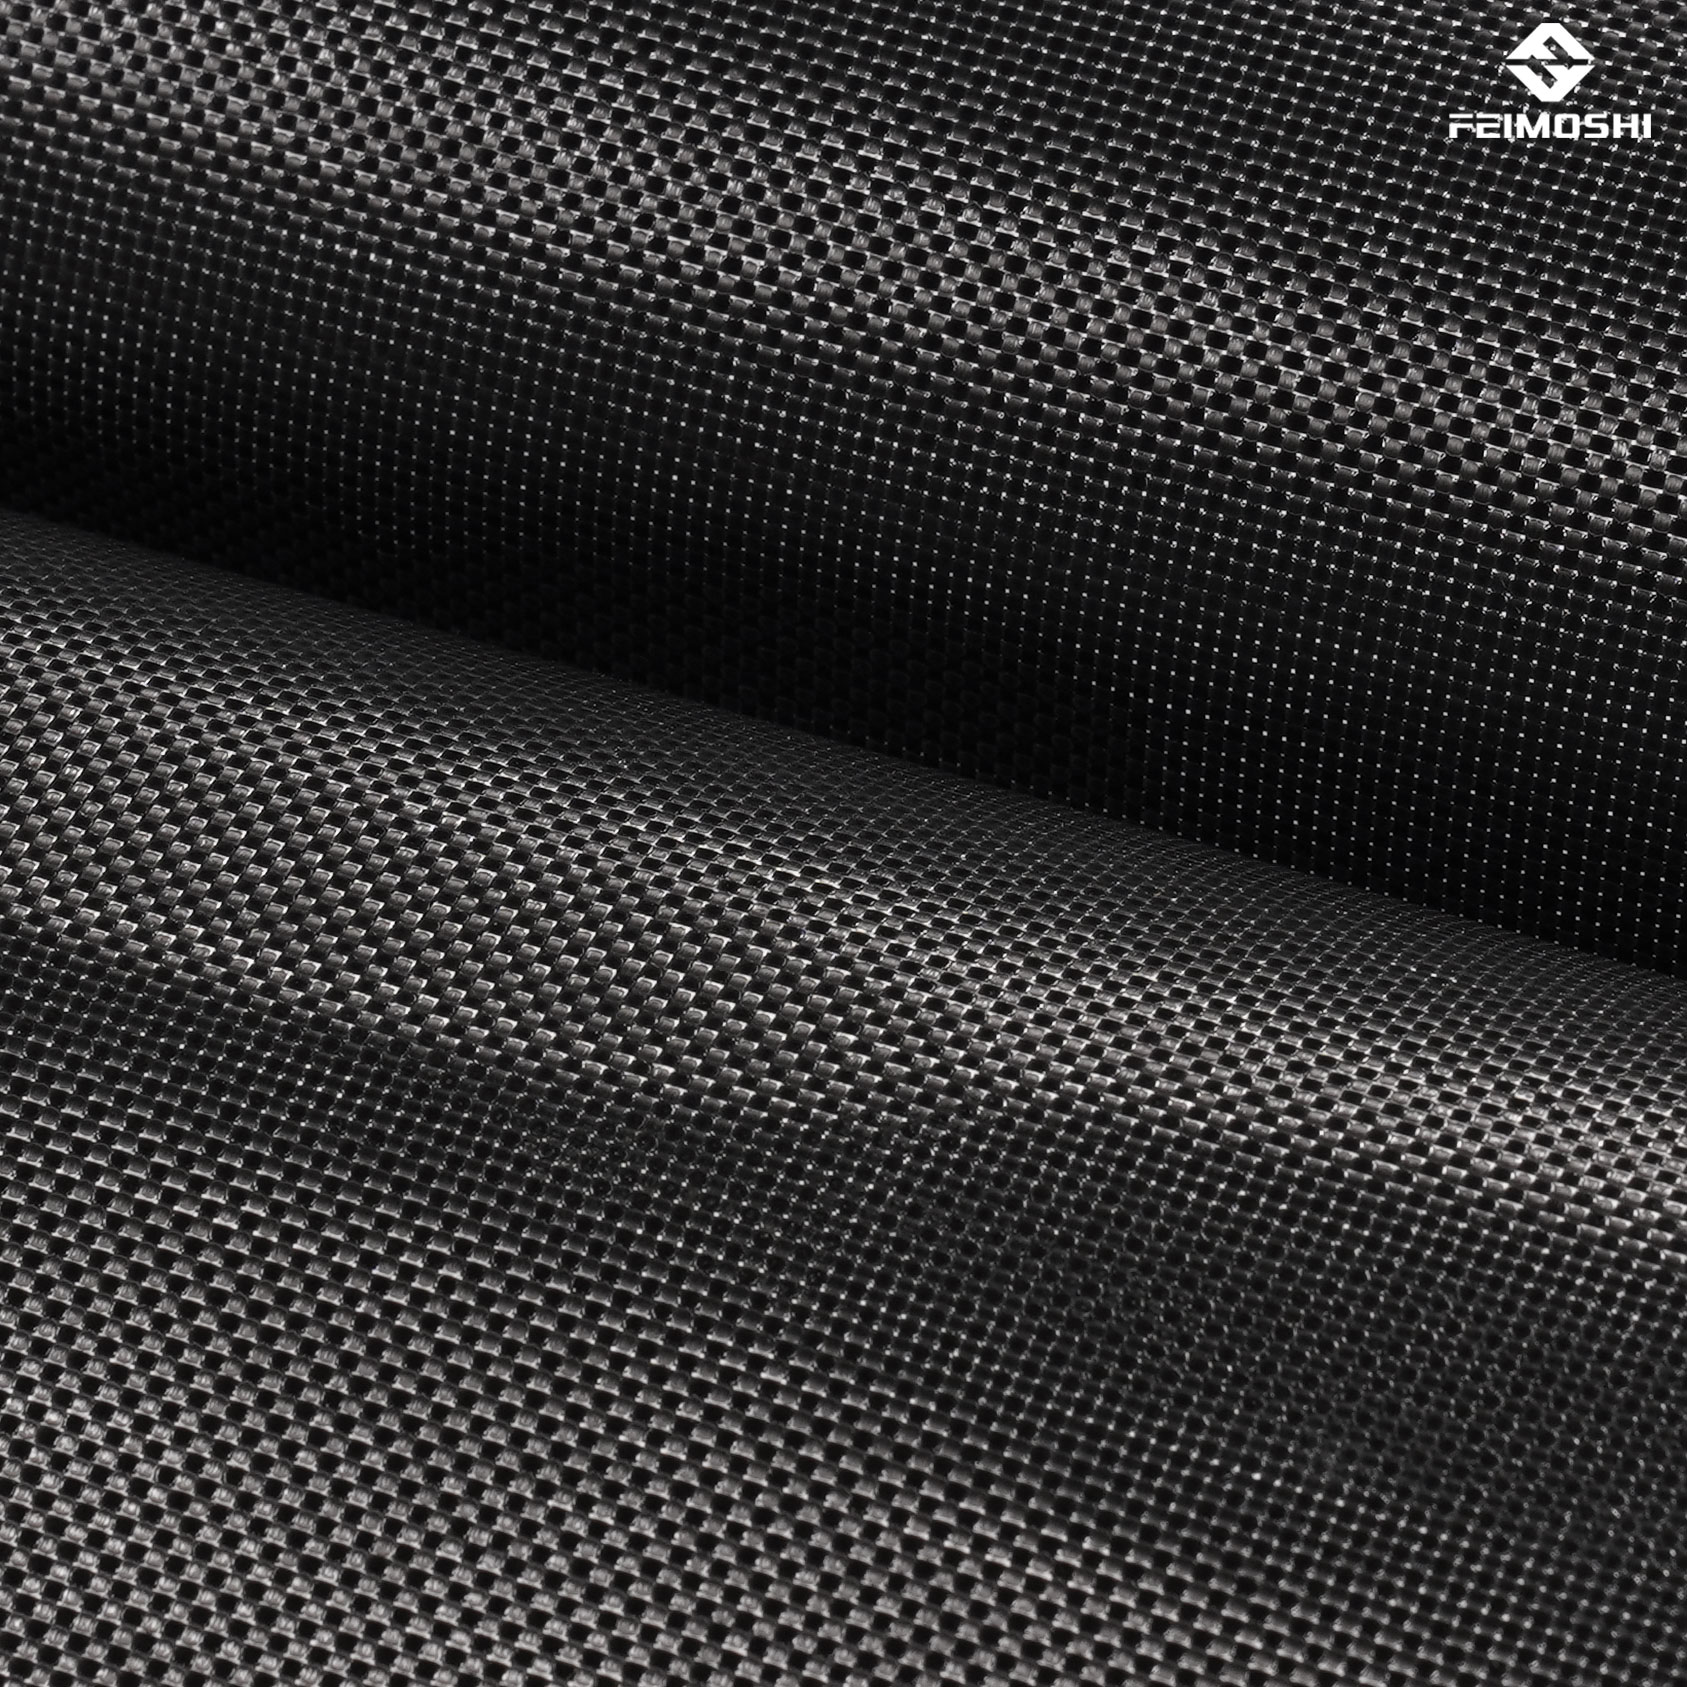 What are the different forms of carbon fiber？